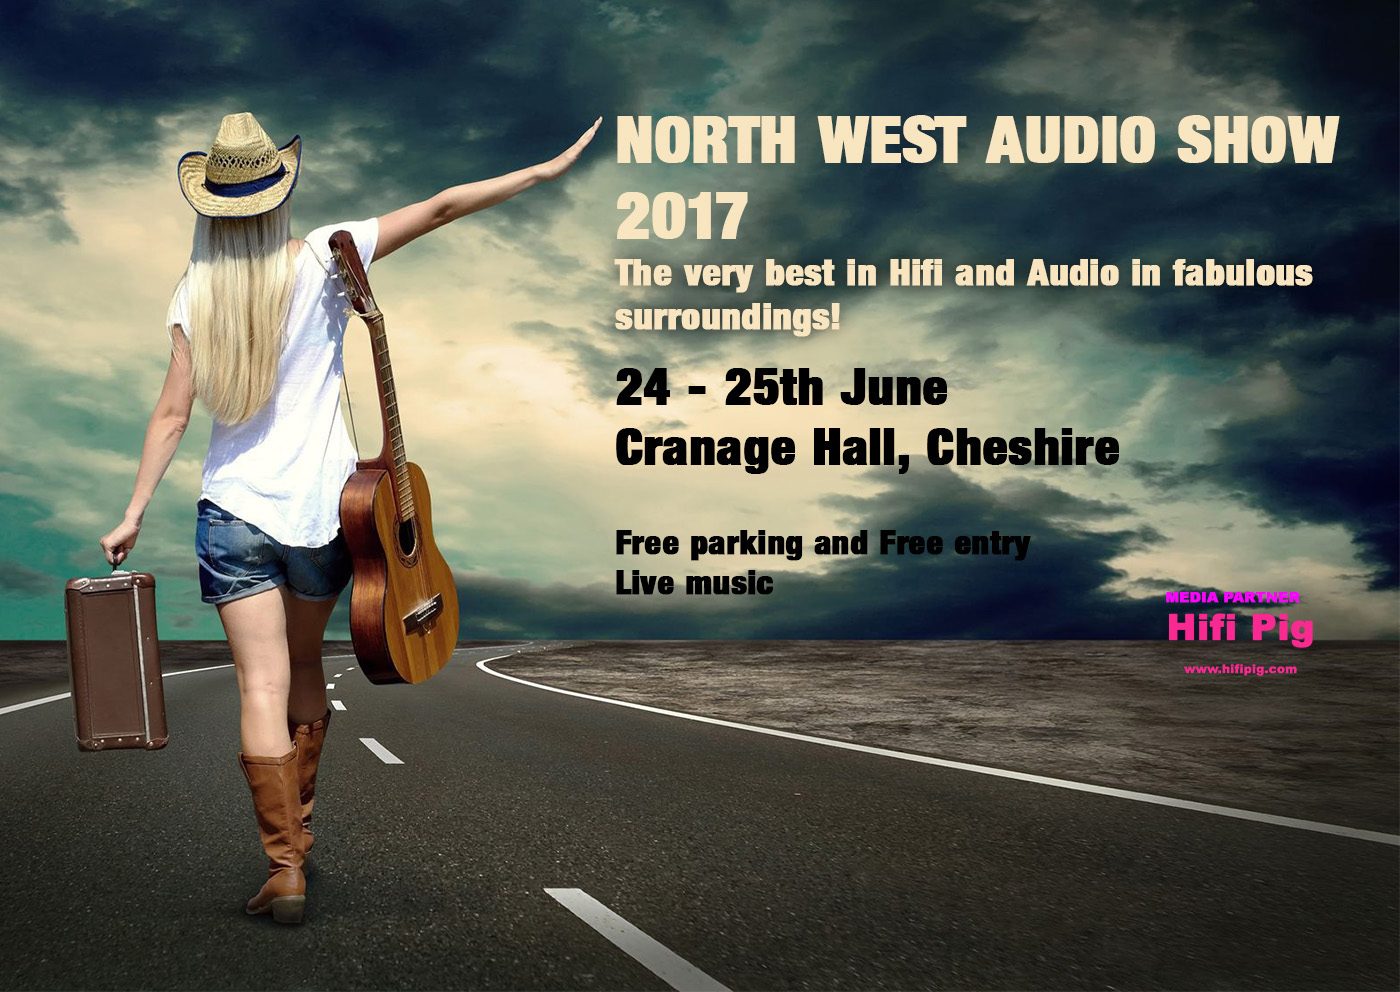 NWaudioshow2017-cropped-OnlinebannerPIGTHIS.jpg